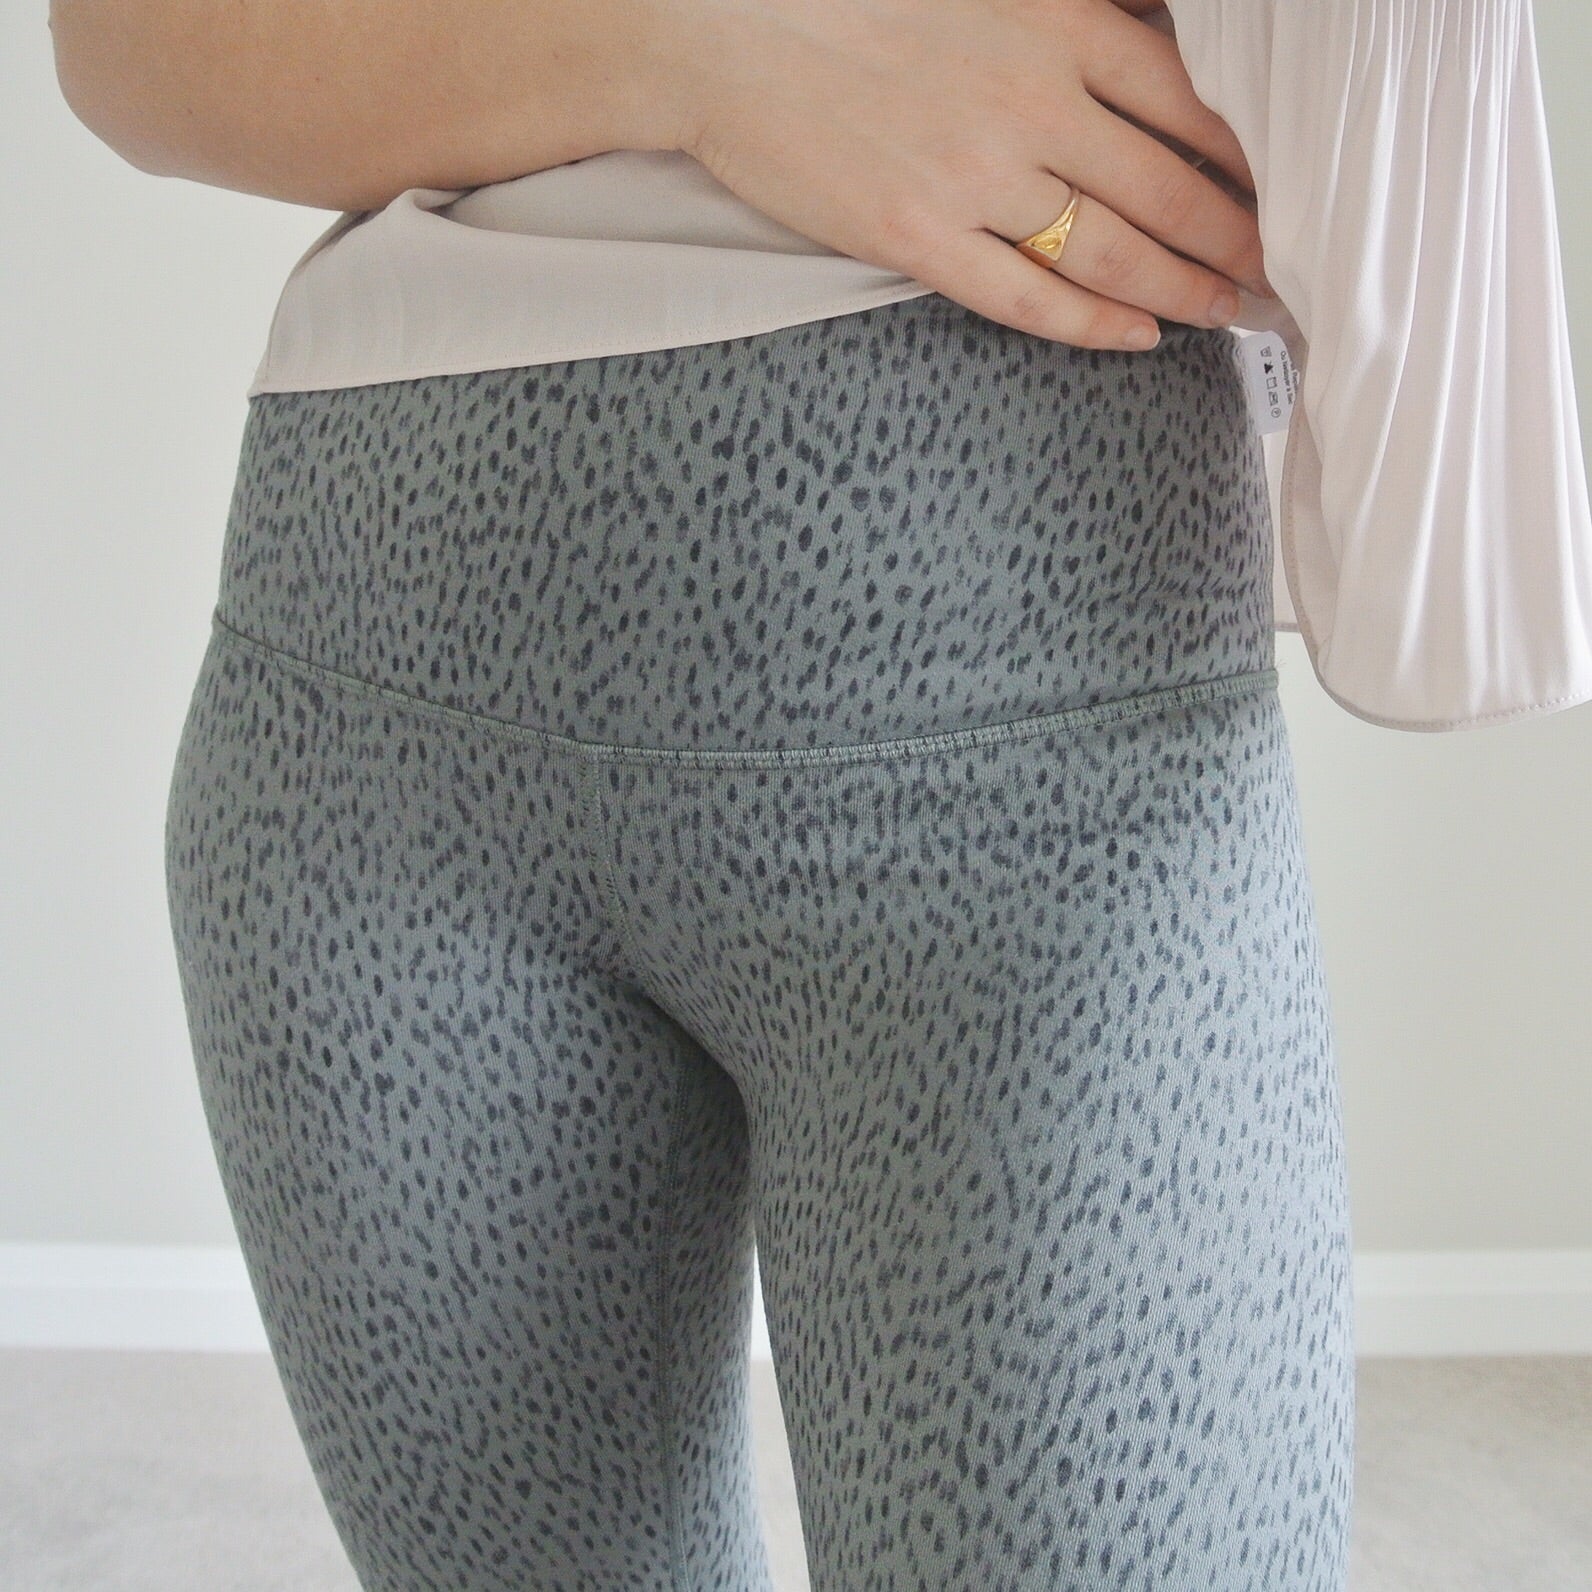 Lululemon Leggings Try-On and Review